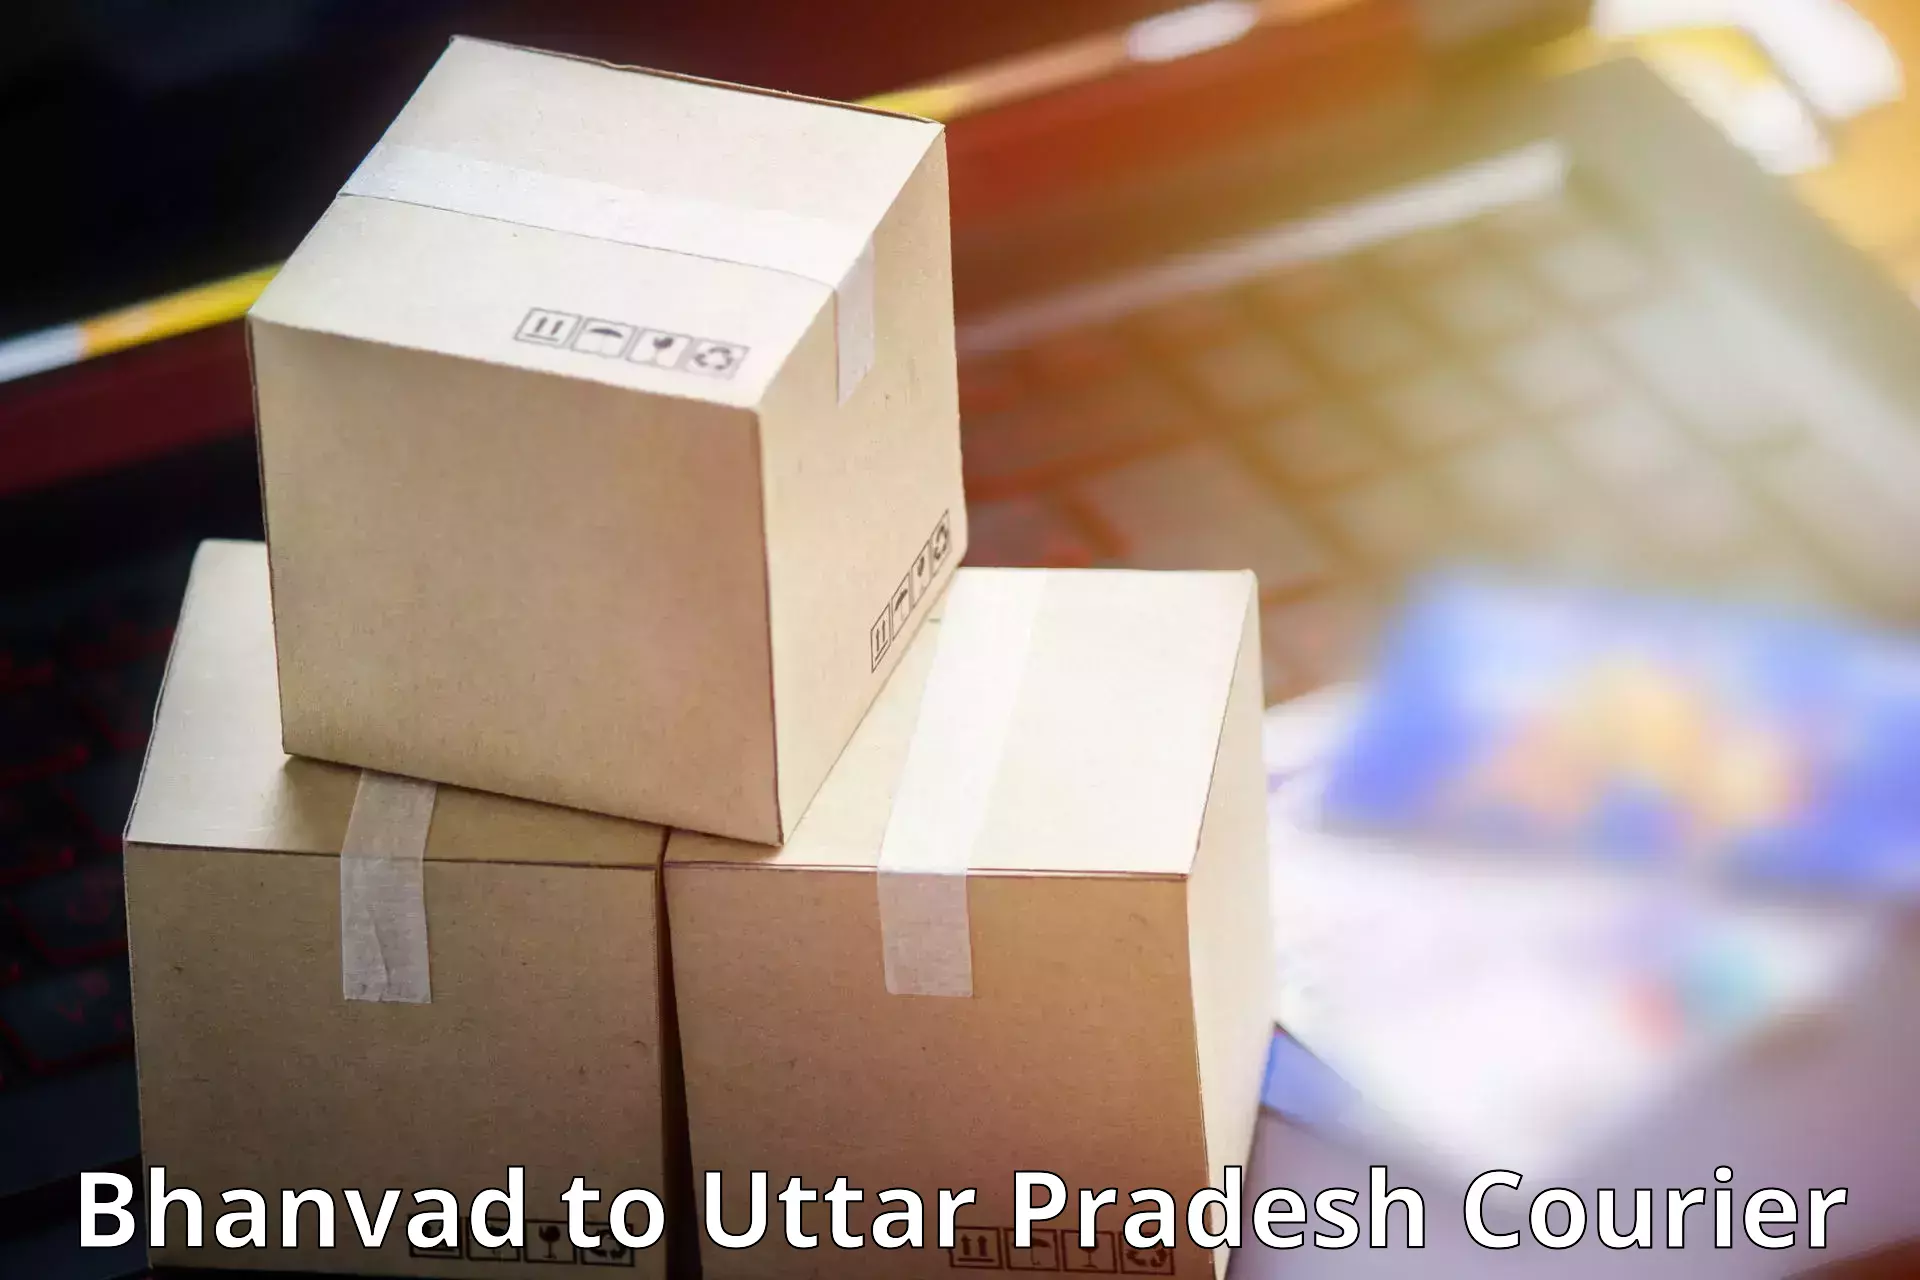 Small business couriers Bhanvad to Agra